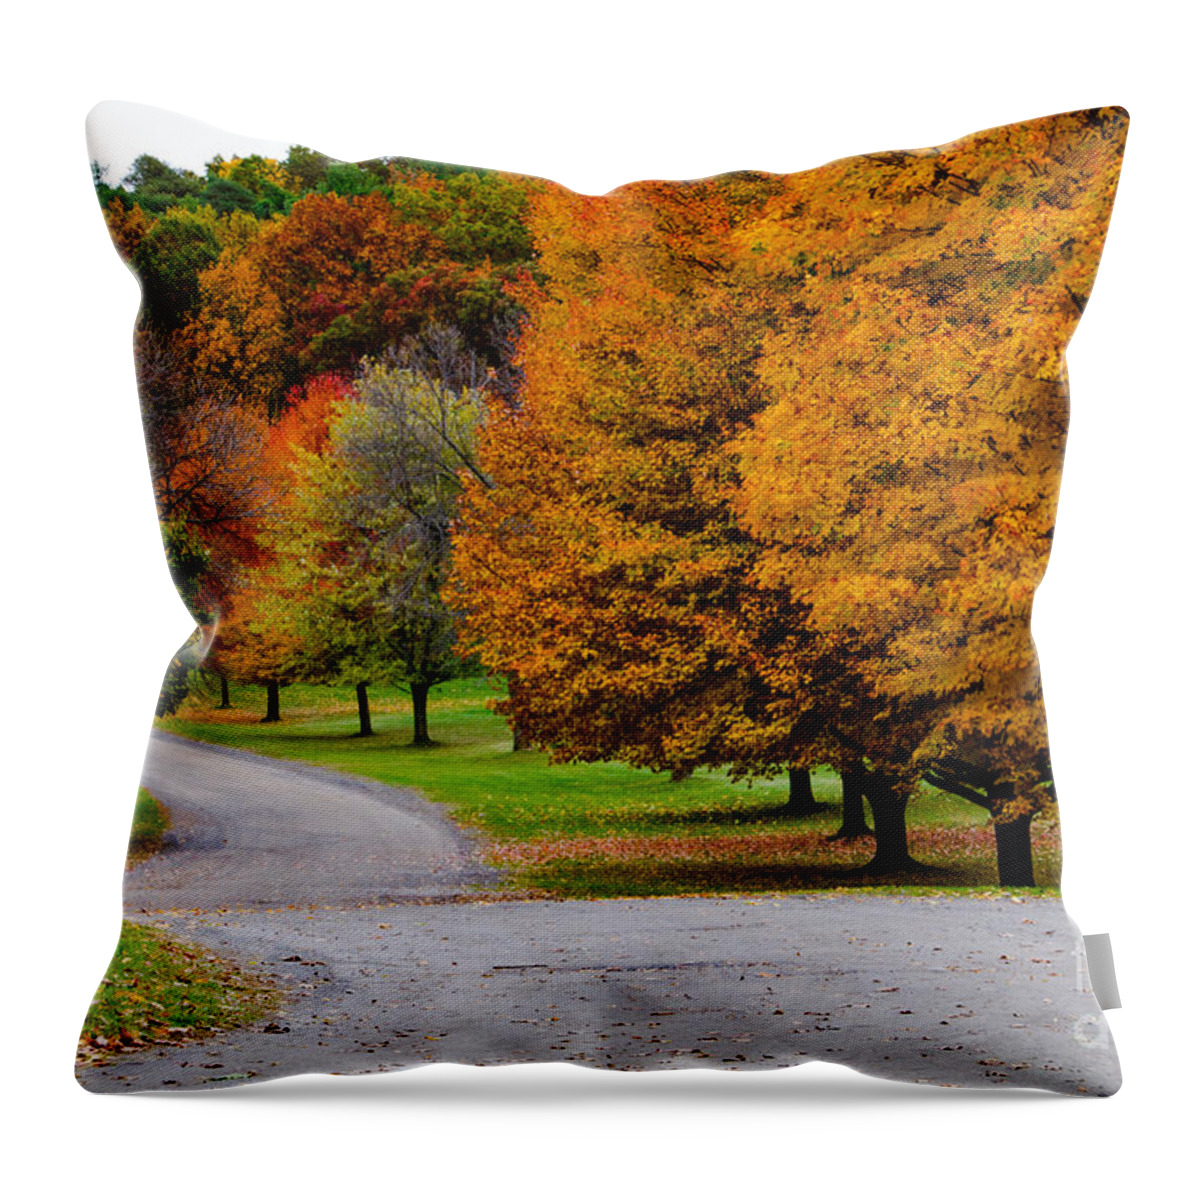 Mendon Ponds Throw Pillow featuring the photograph Winding Road by William Norton